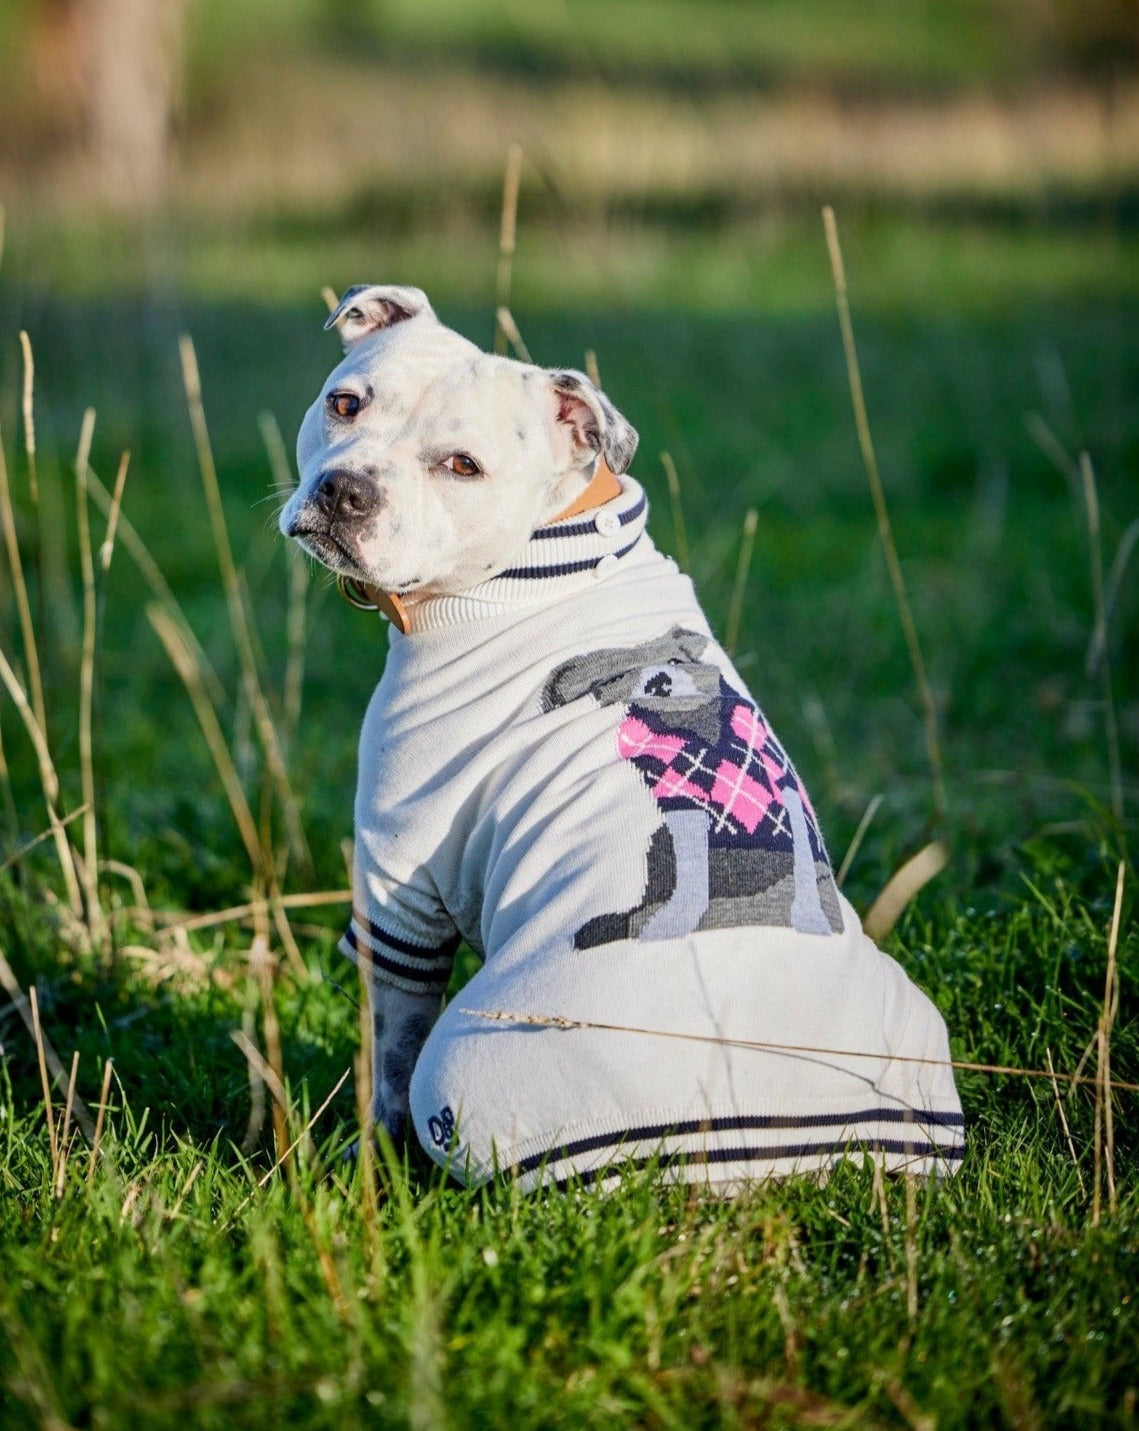 A staffy wearing the Darren and Phillip dog jumper.